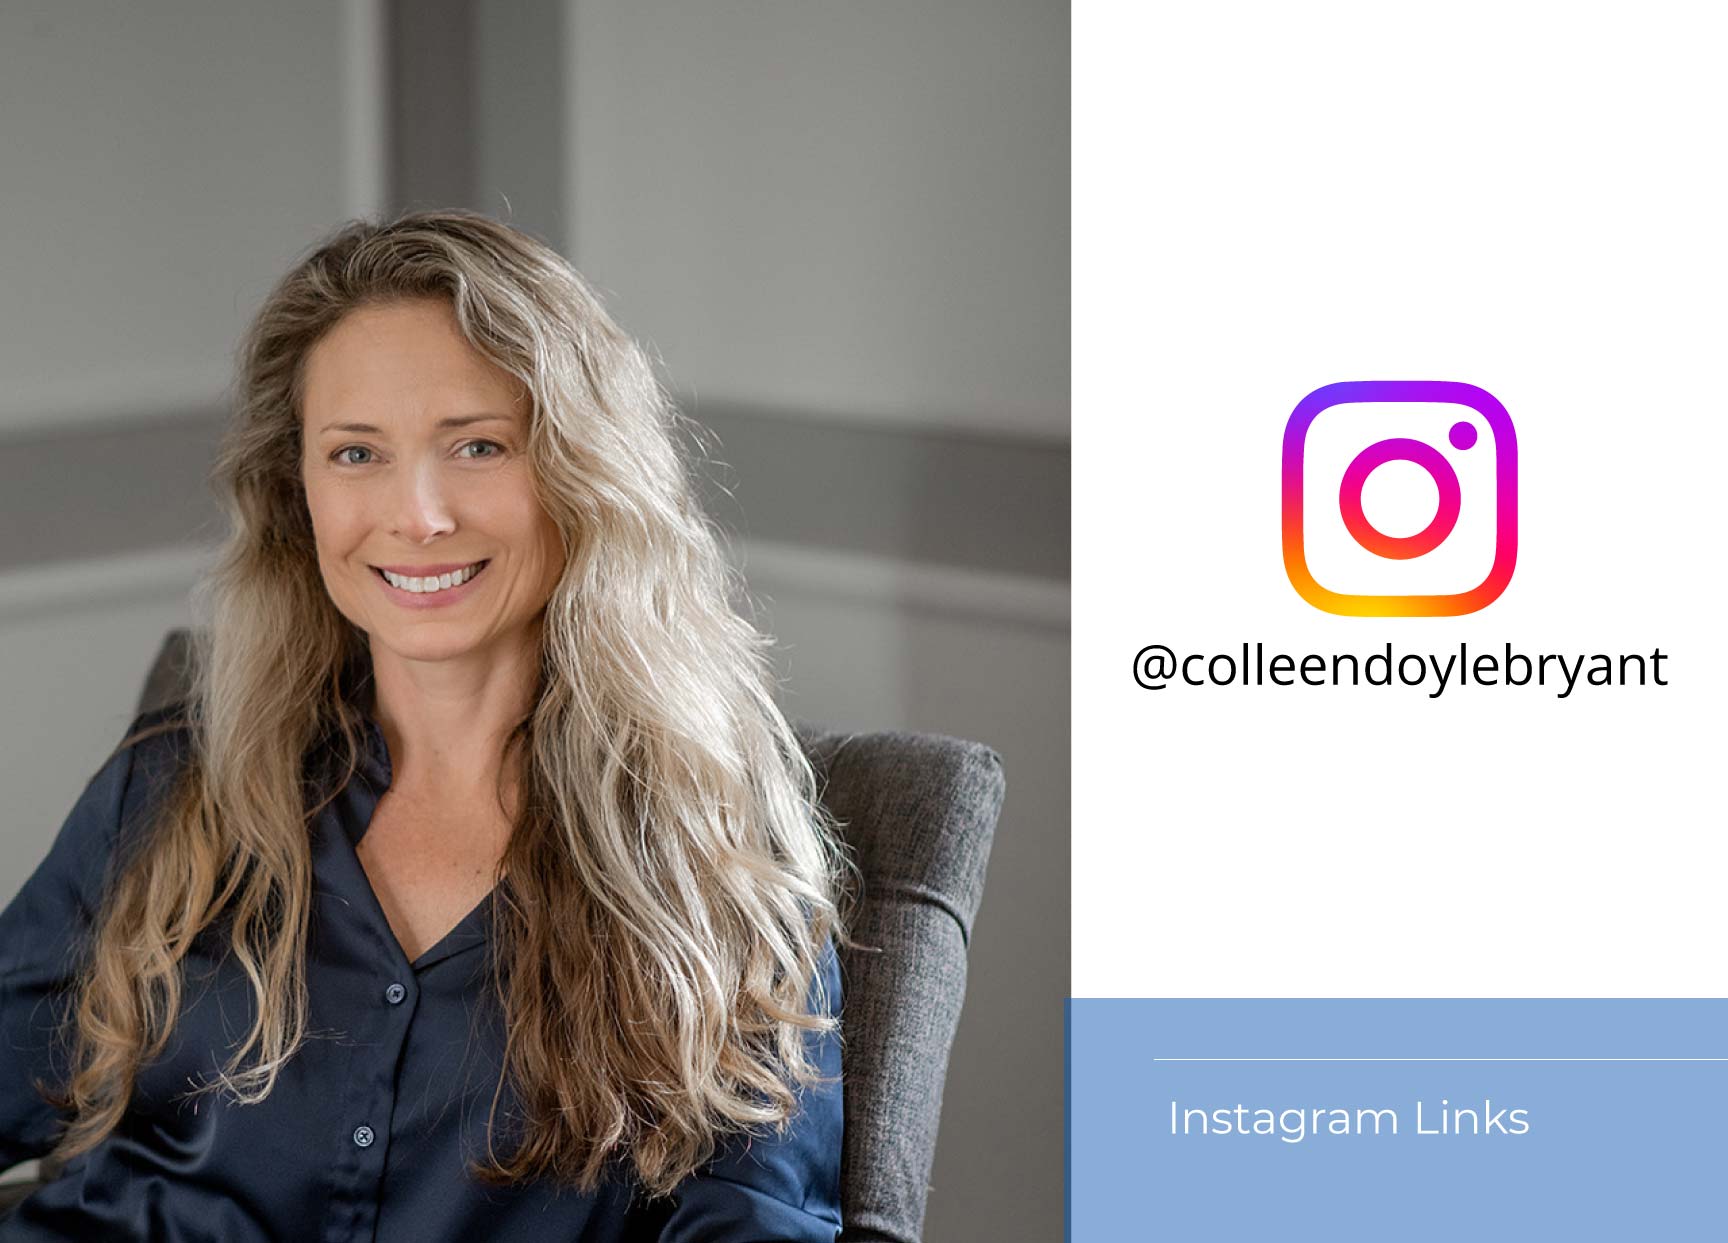 Instagram post links for Colleen Doyle Bryant